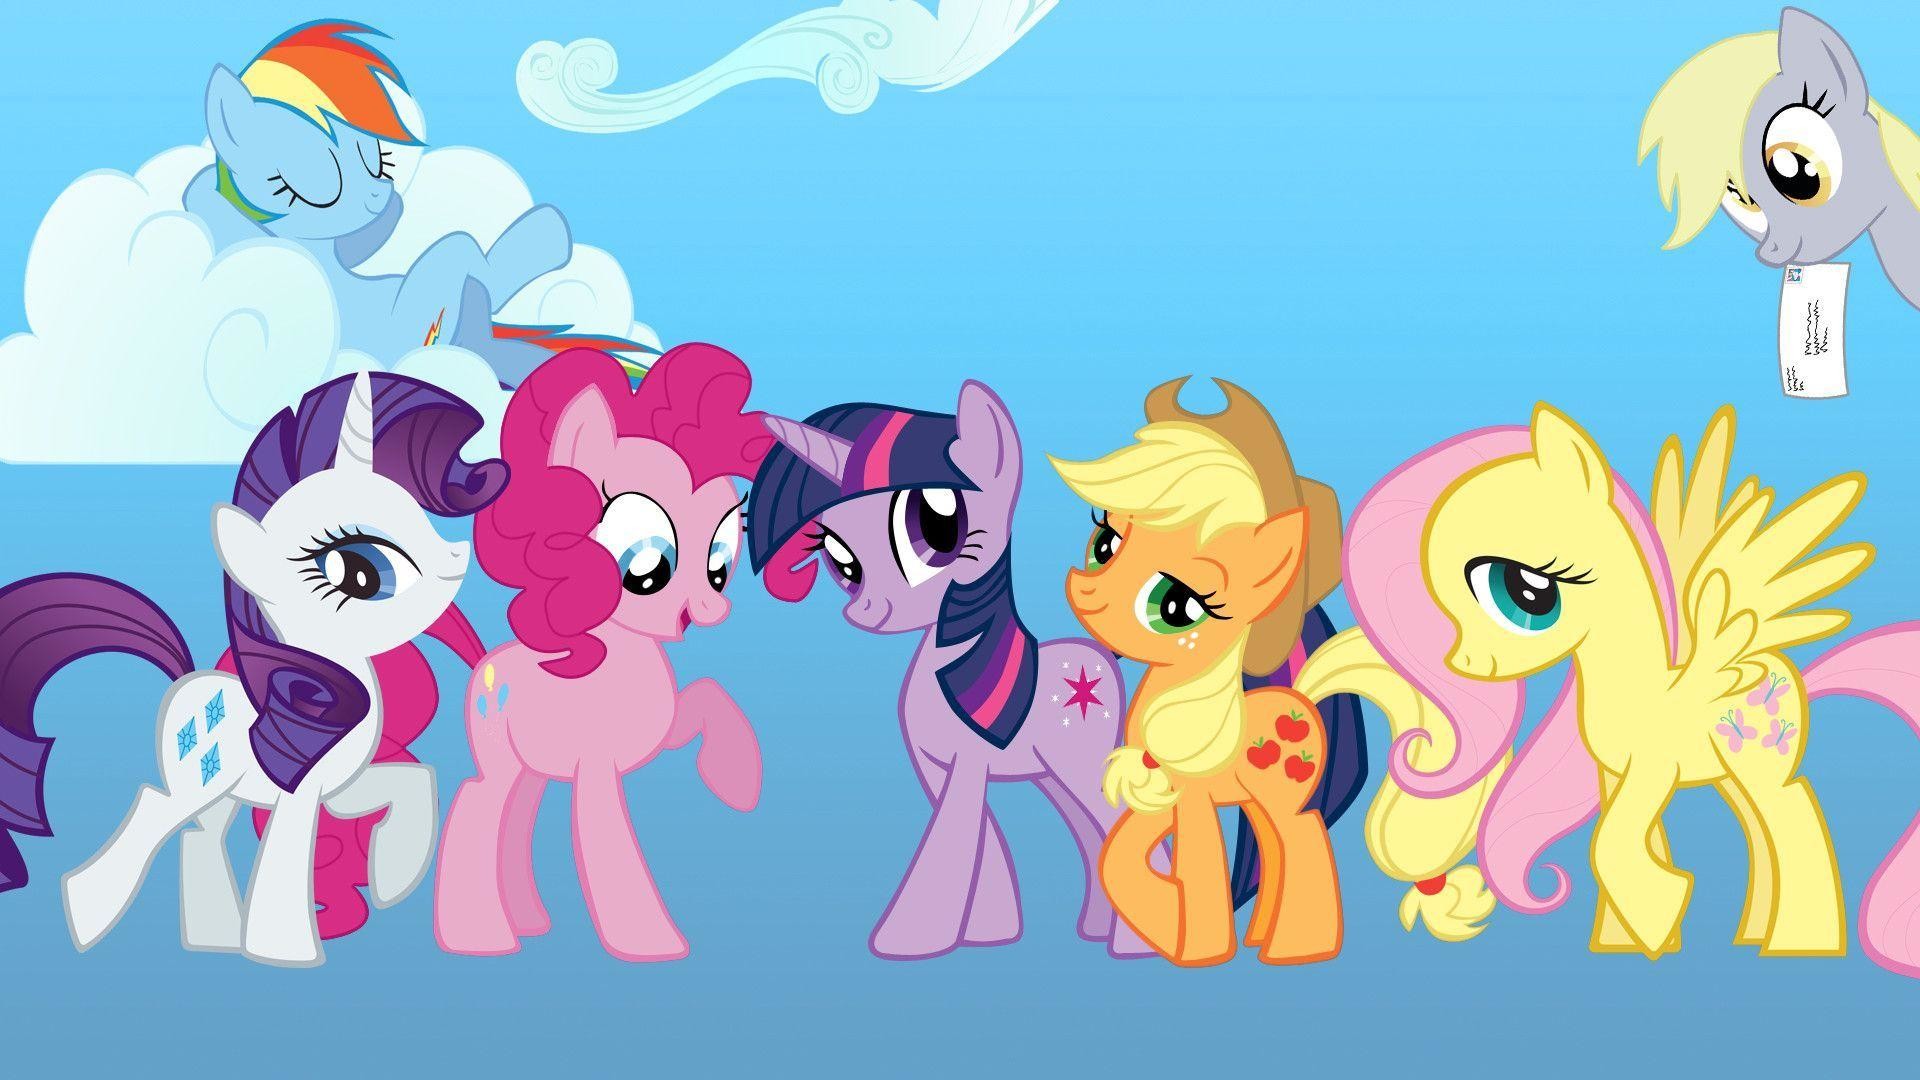 1920x1080 My Little Pony Wallpapers - My Little Pony Friendship is Magic .